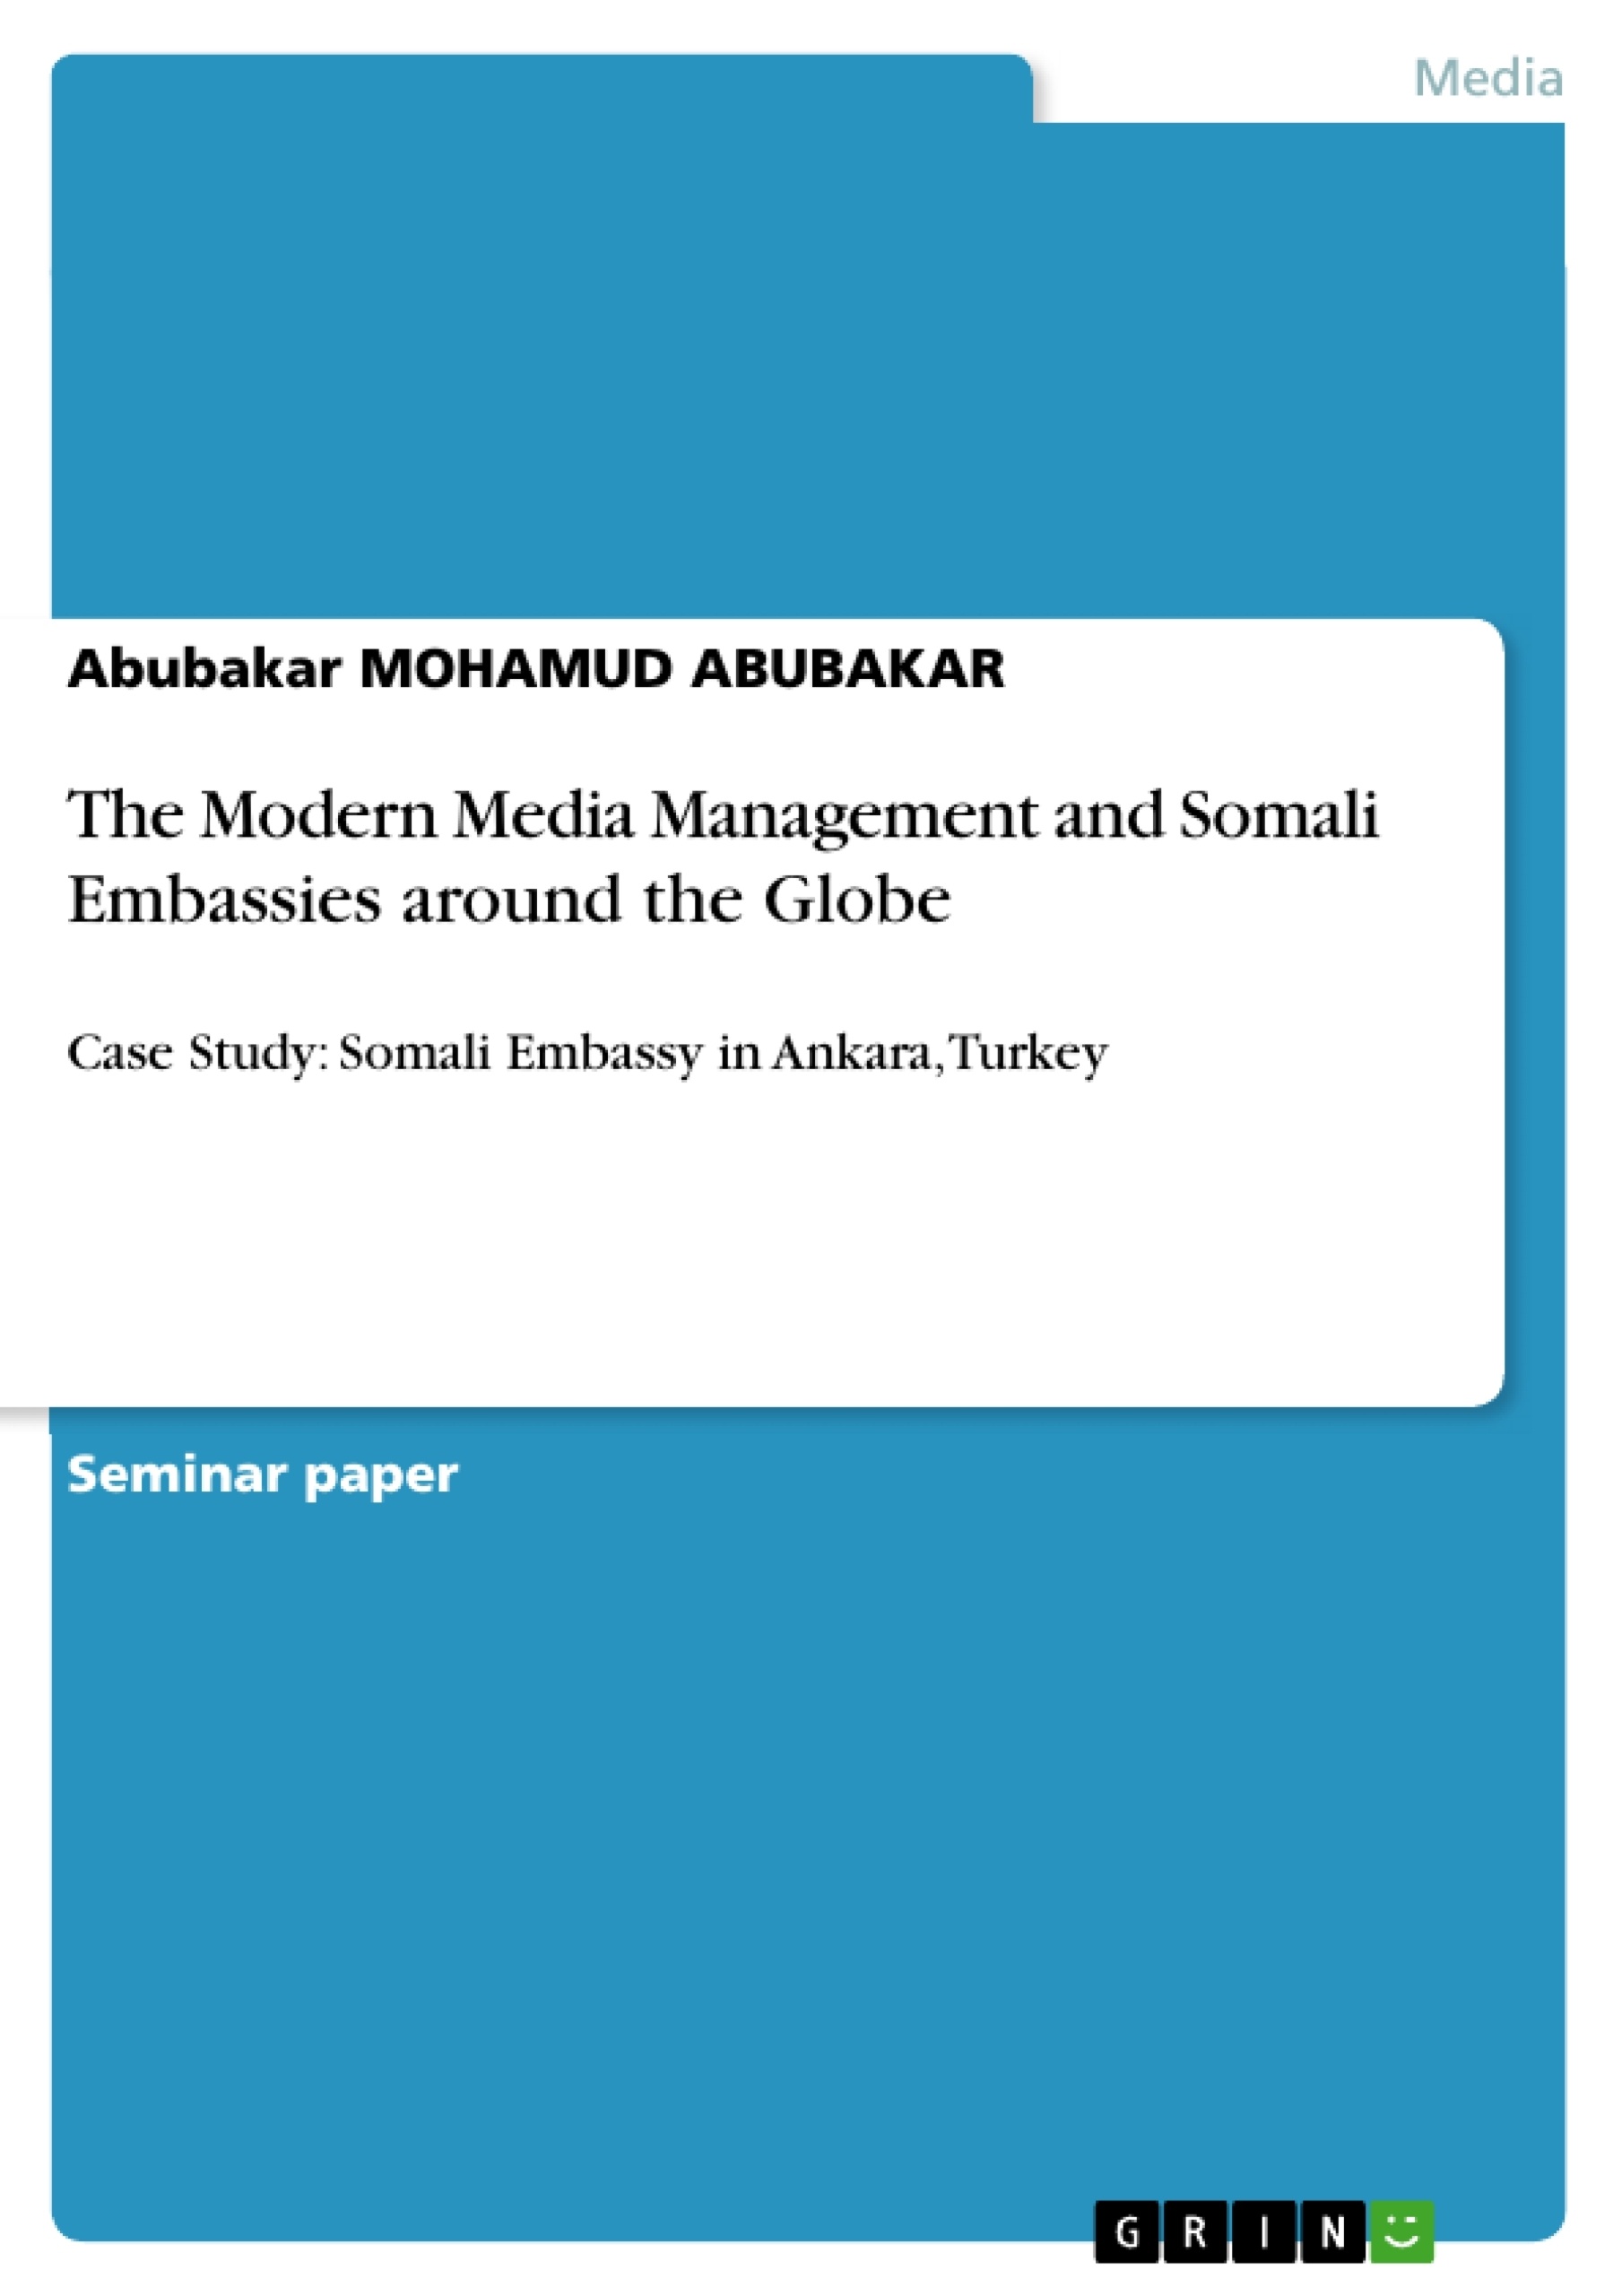 Titre: The Modern Media Management and Somali Embassies around the Globe